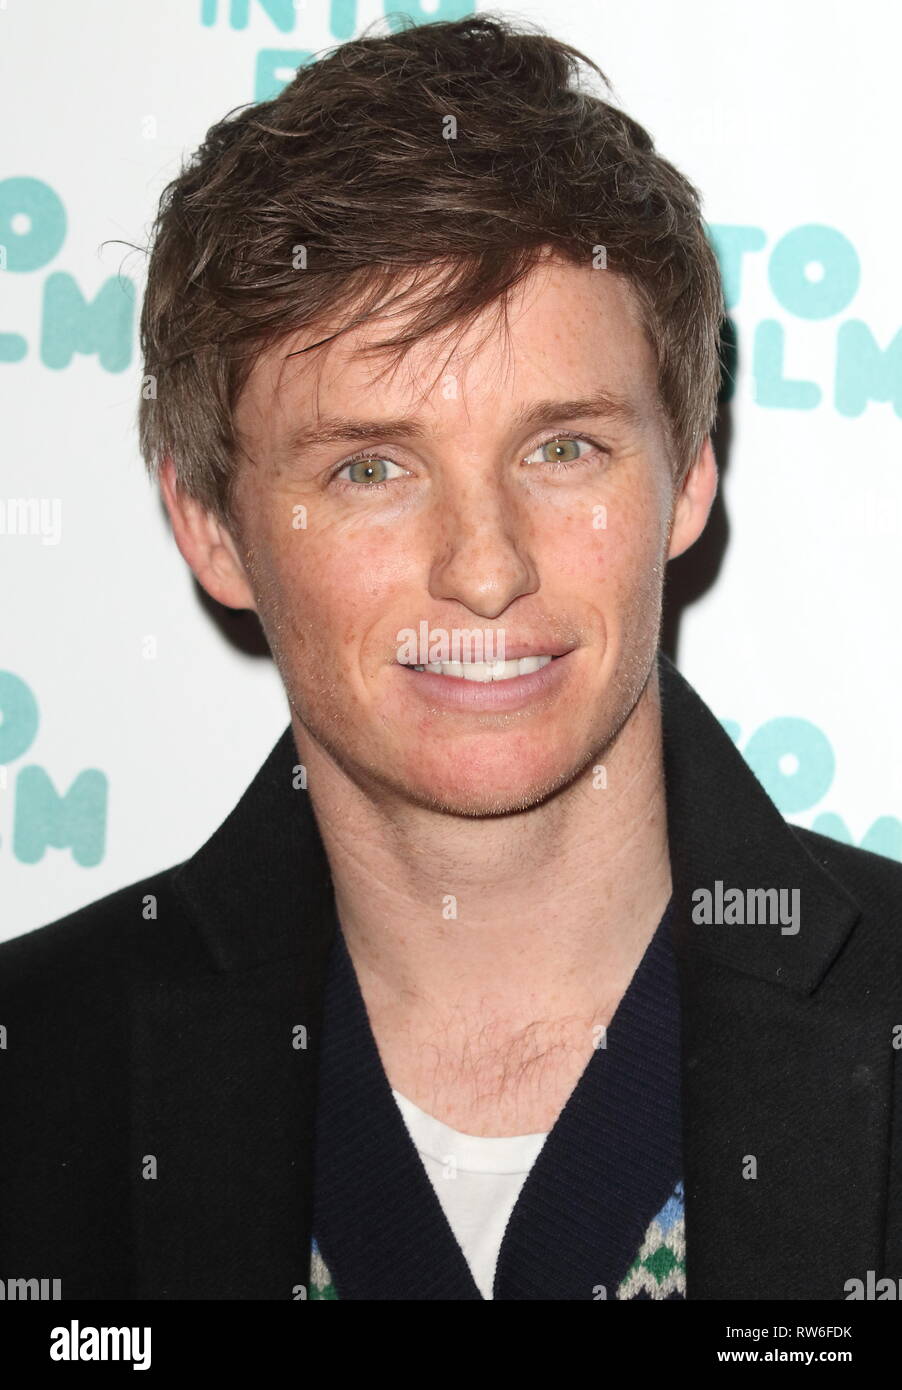 Eddie Redmayne seen during the Into Film Awards 2019 at the Odeon Luxe cinema, Leicester Square in London. Stock Photo